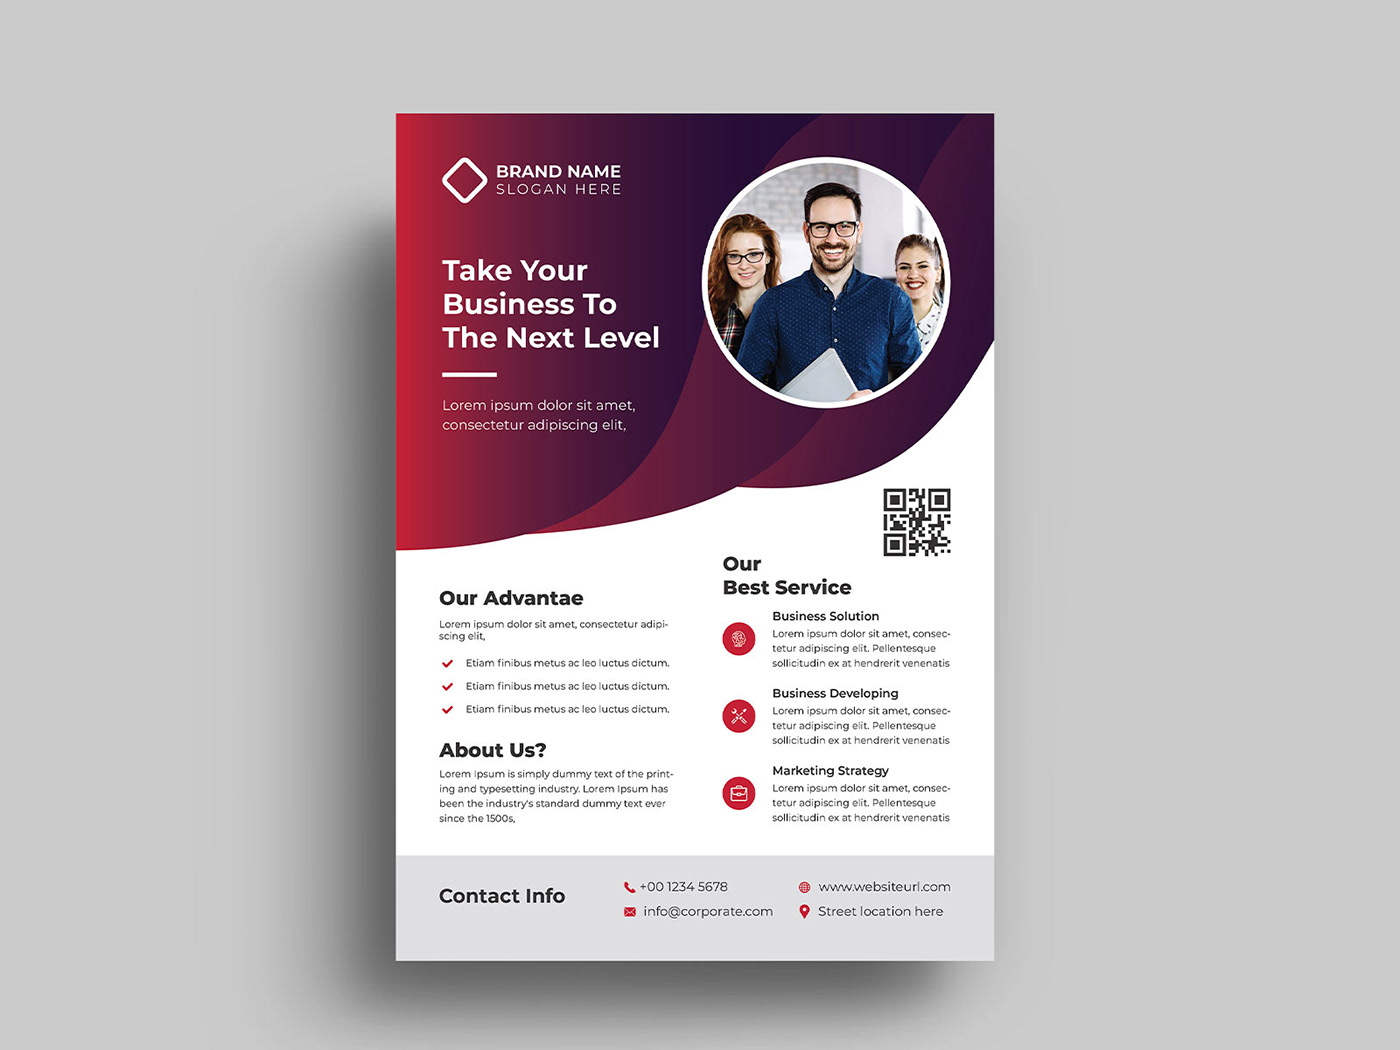 #advertisement #Business Flyer #Corporate flyer #Design #flyer #flyer design #graphic design #multipurpose #Professional #template  